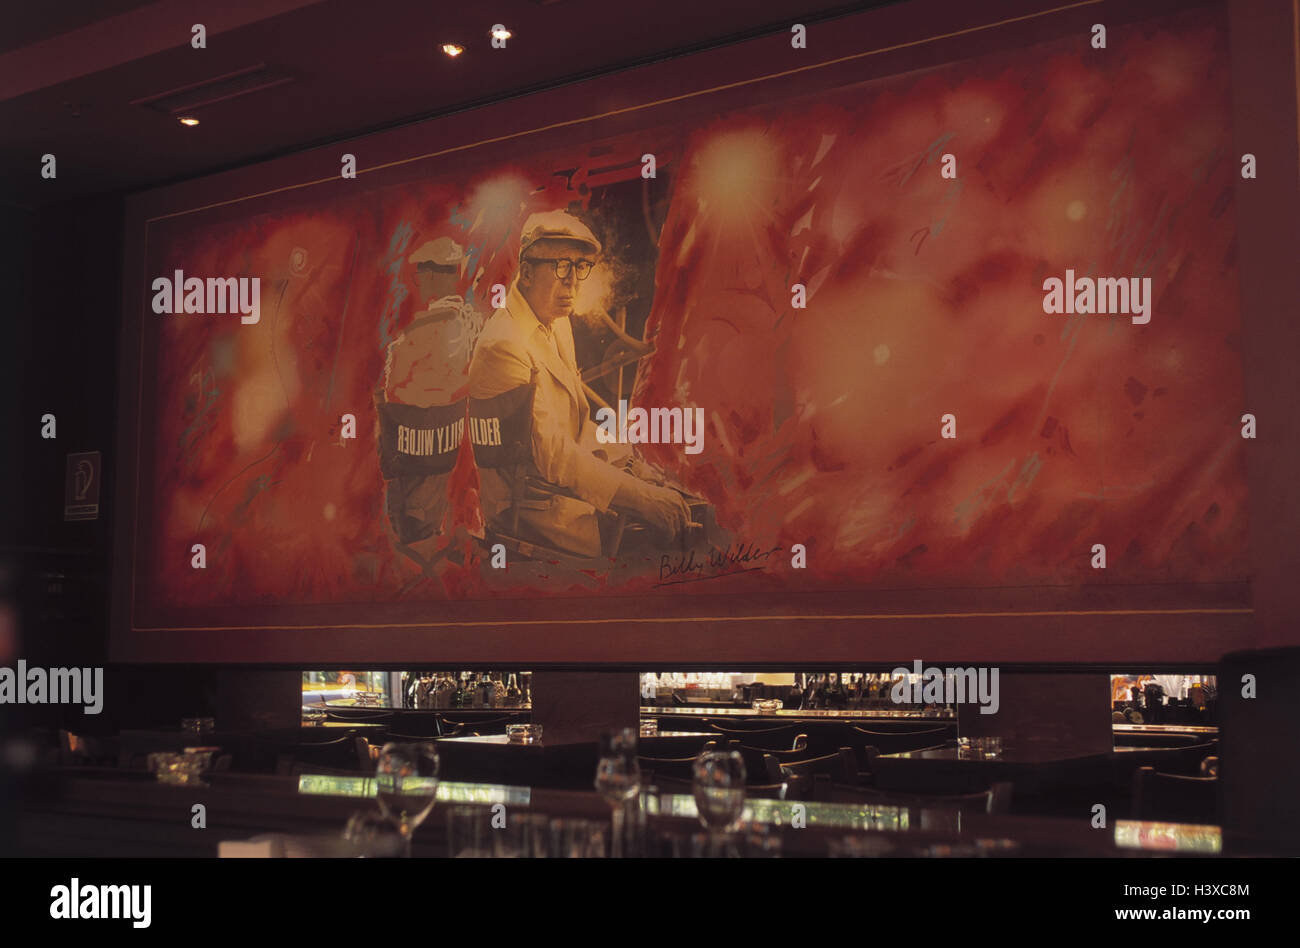 Germany, Berlin, Billy wilder it bar, counter, wall, painting, Europe, capital, Potsdam space, bar, bar, defensive wall, selfportrait, scriptwriter, director, director, product photography, gastronomy Stock Photo